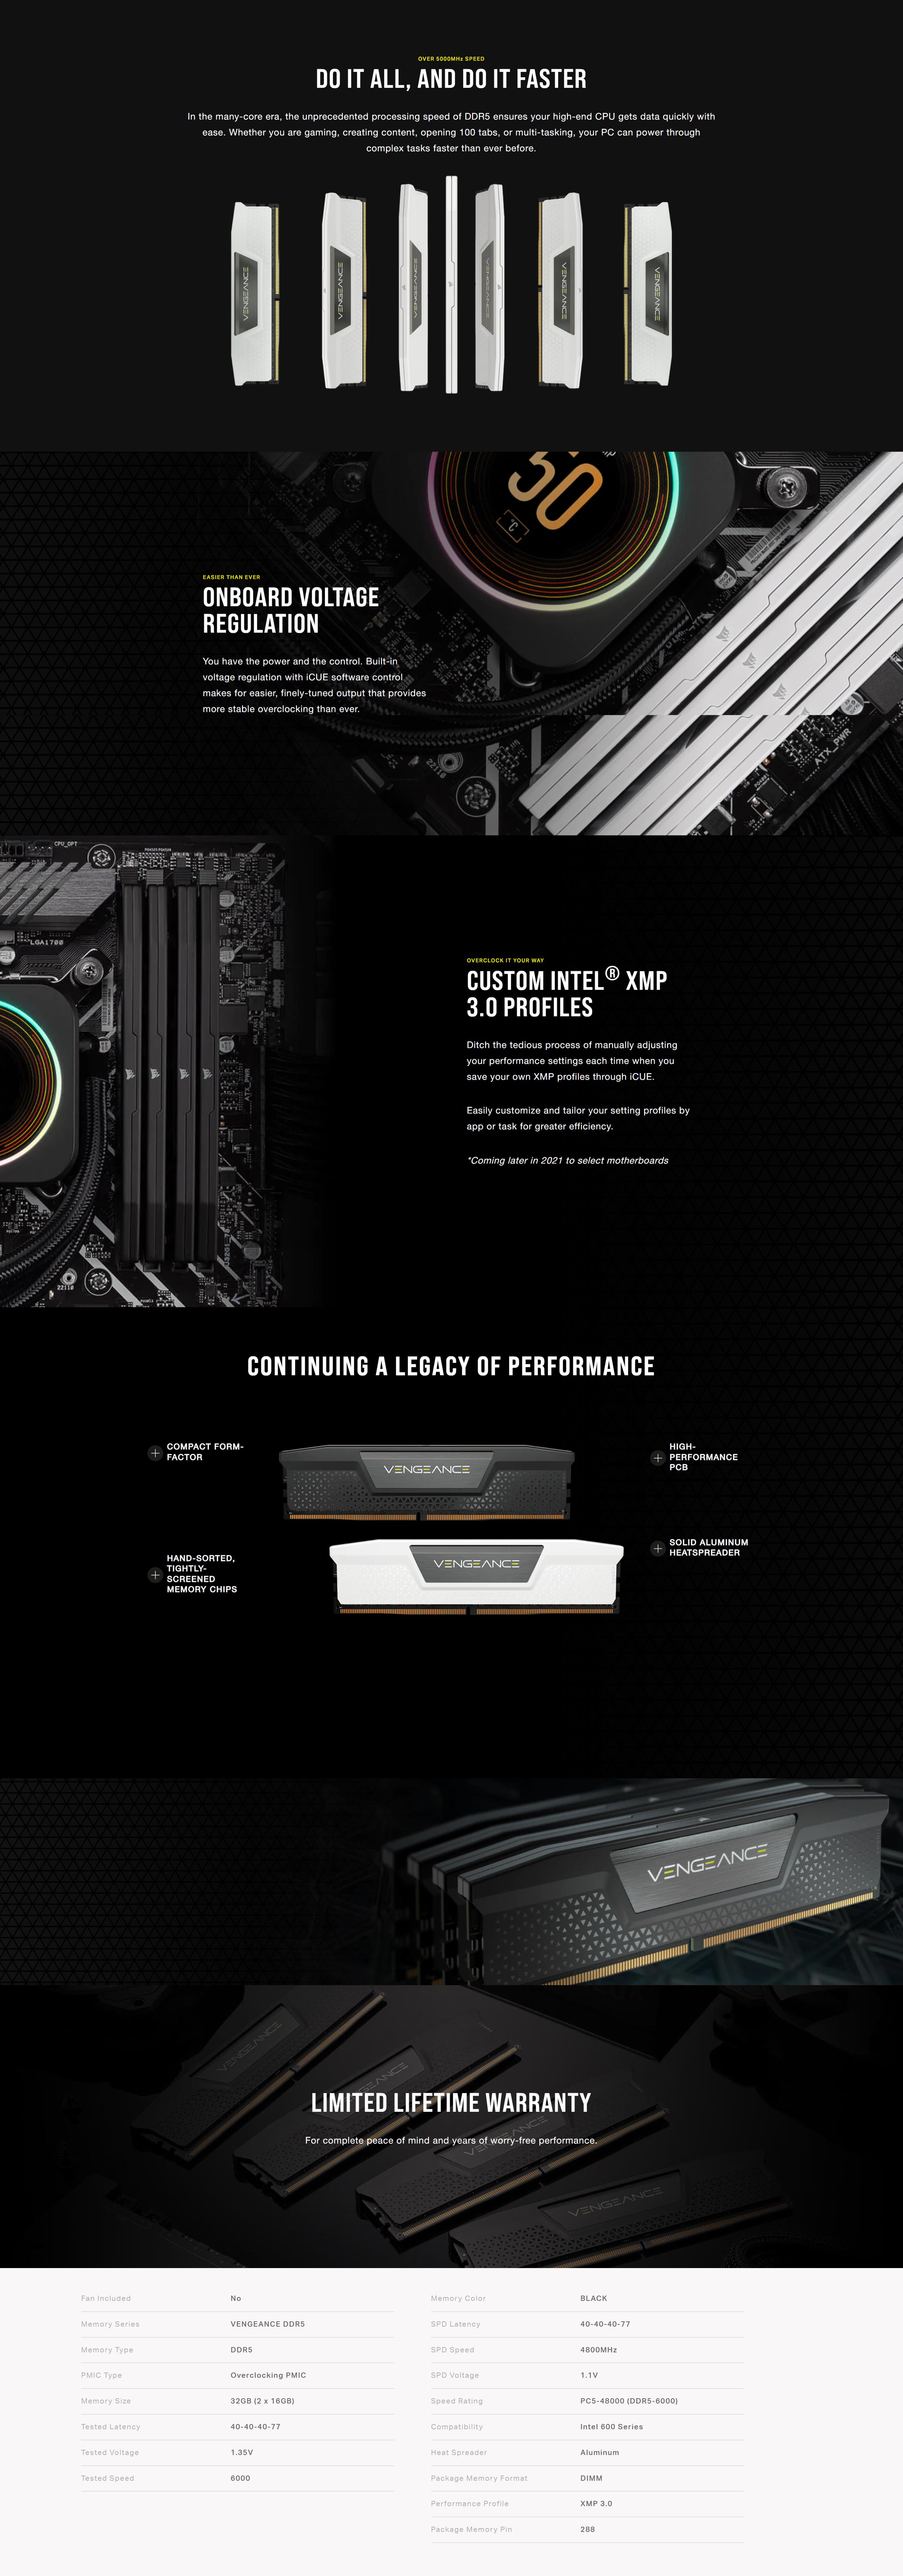 A large marketing image providing additional information about the product Corsair 32GB Kit (2x16GB) DDR5 Vengeance C40 6000MT/s - Black - Additional alt info not provided